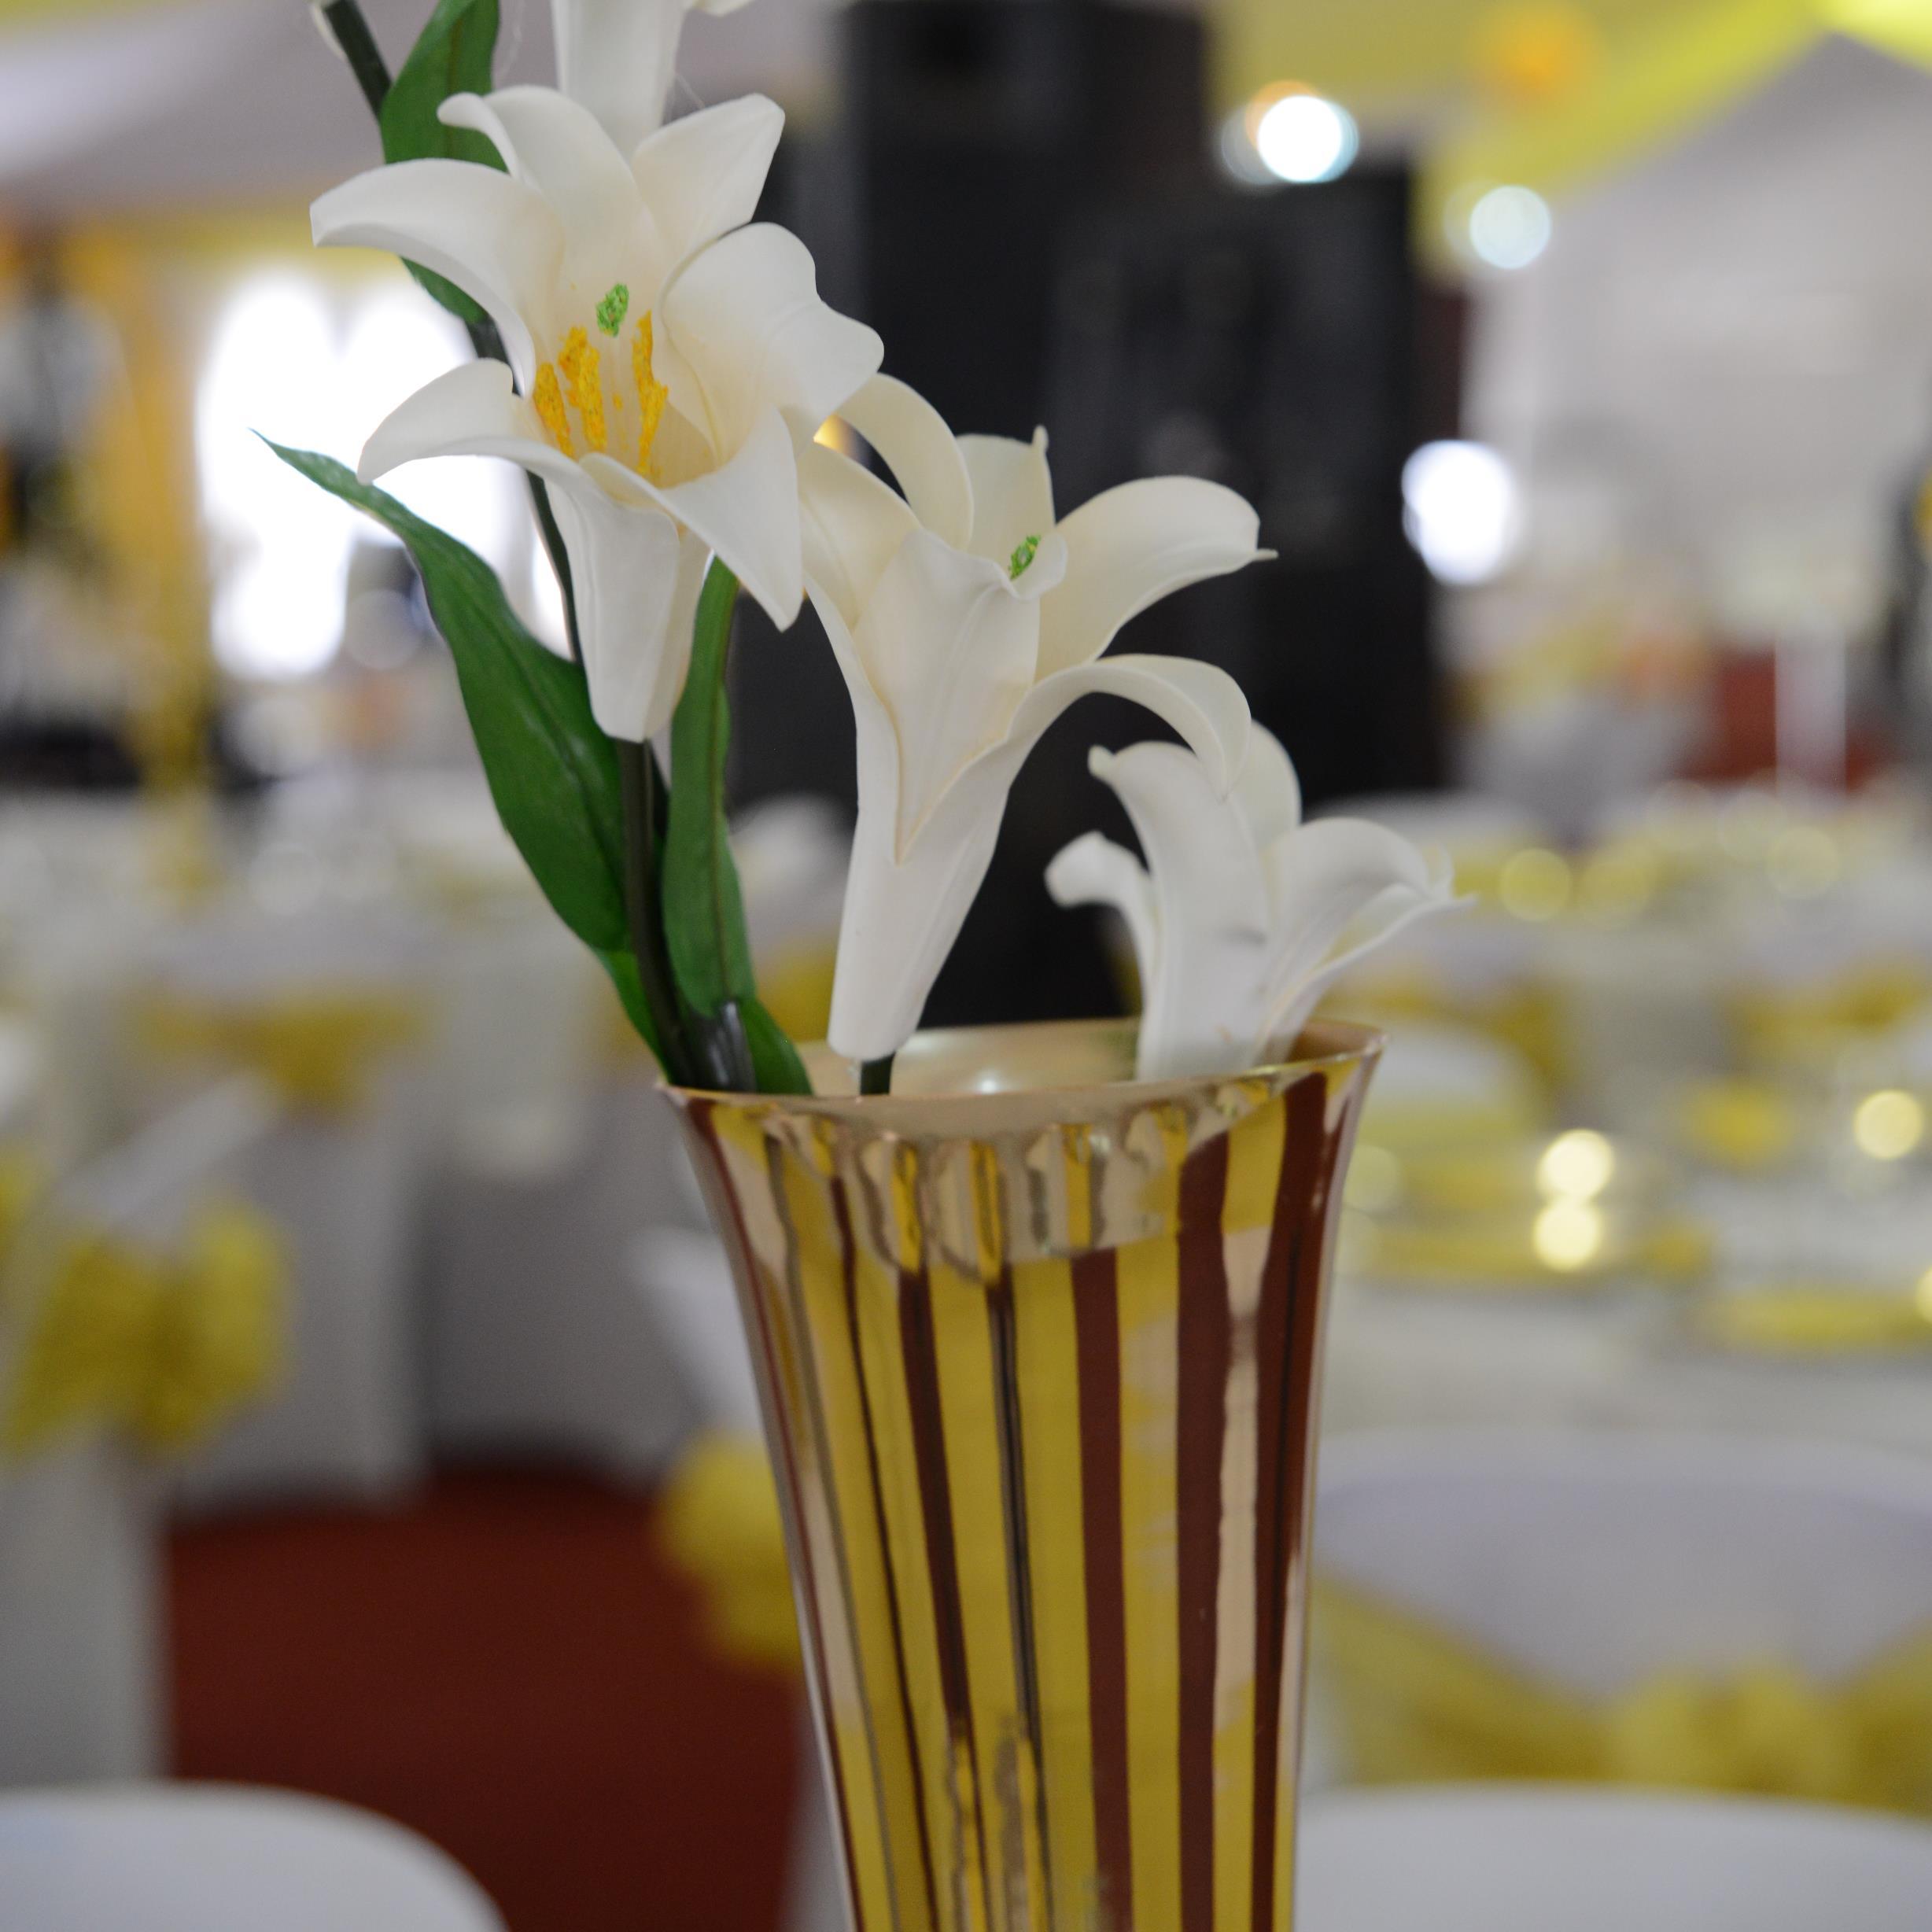 Top norch #events #decorators and #planners. We also do rentals of unique chairs, tables, marquee, gazebo, lightening and so on